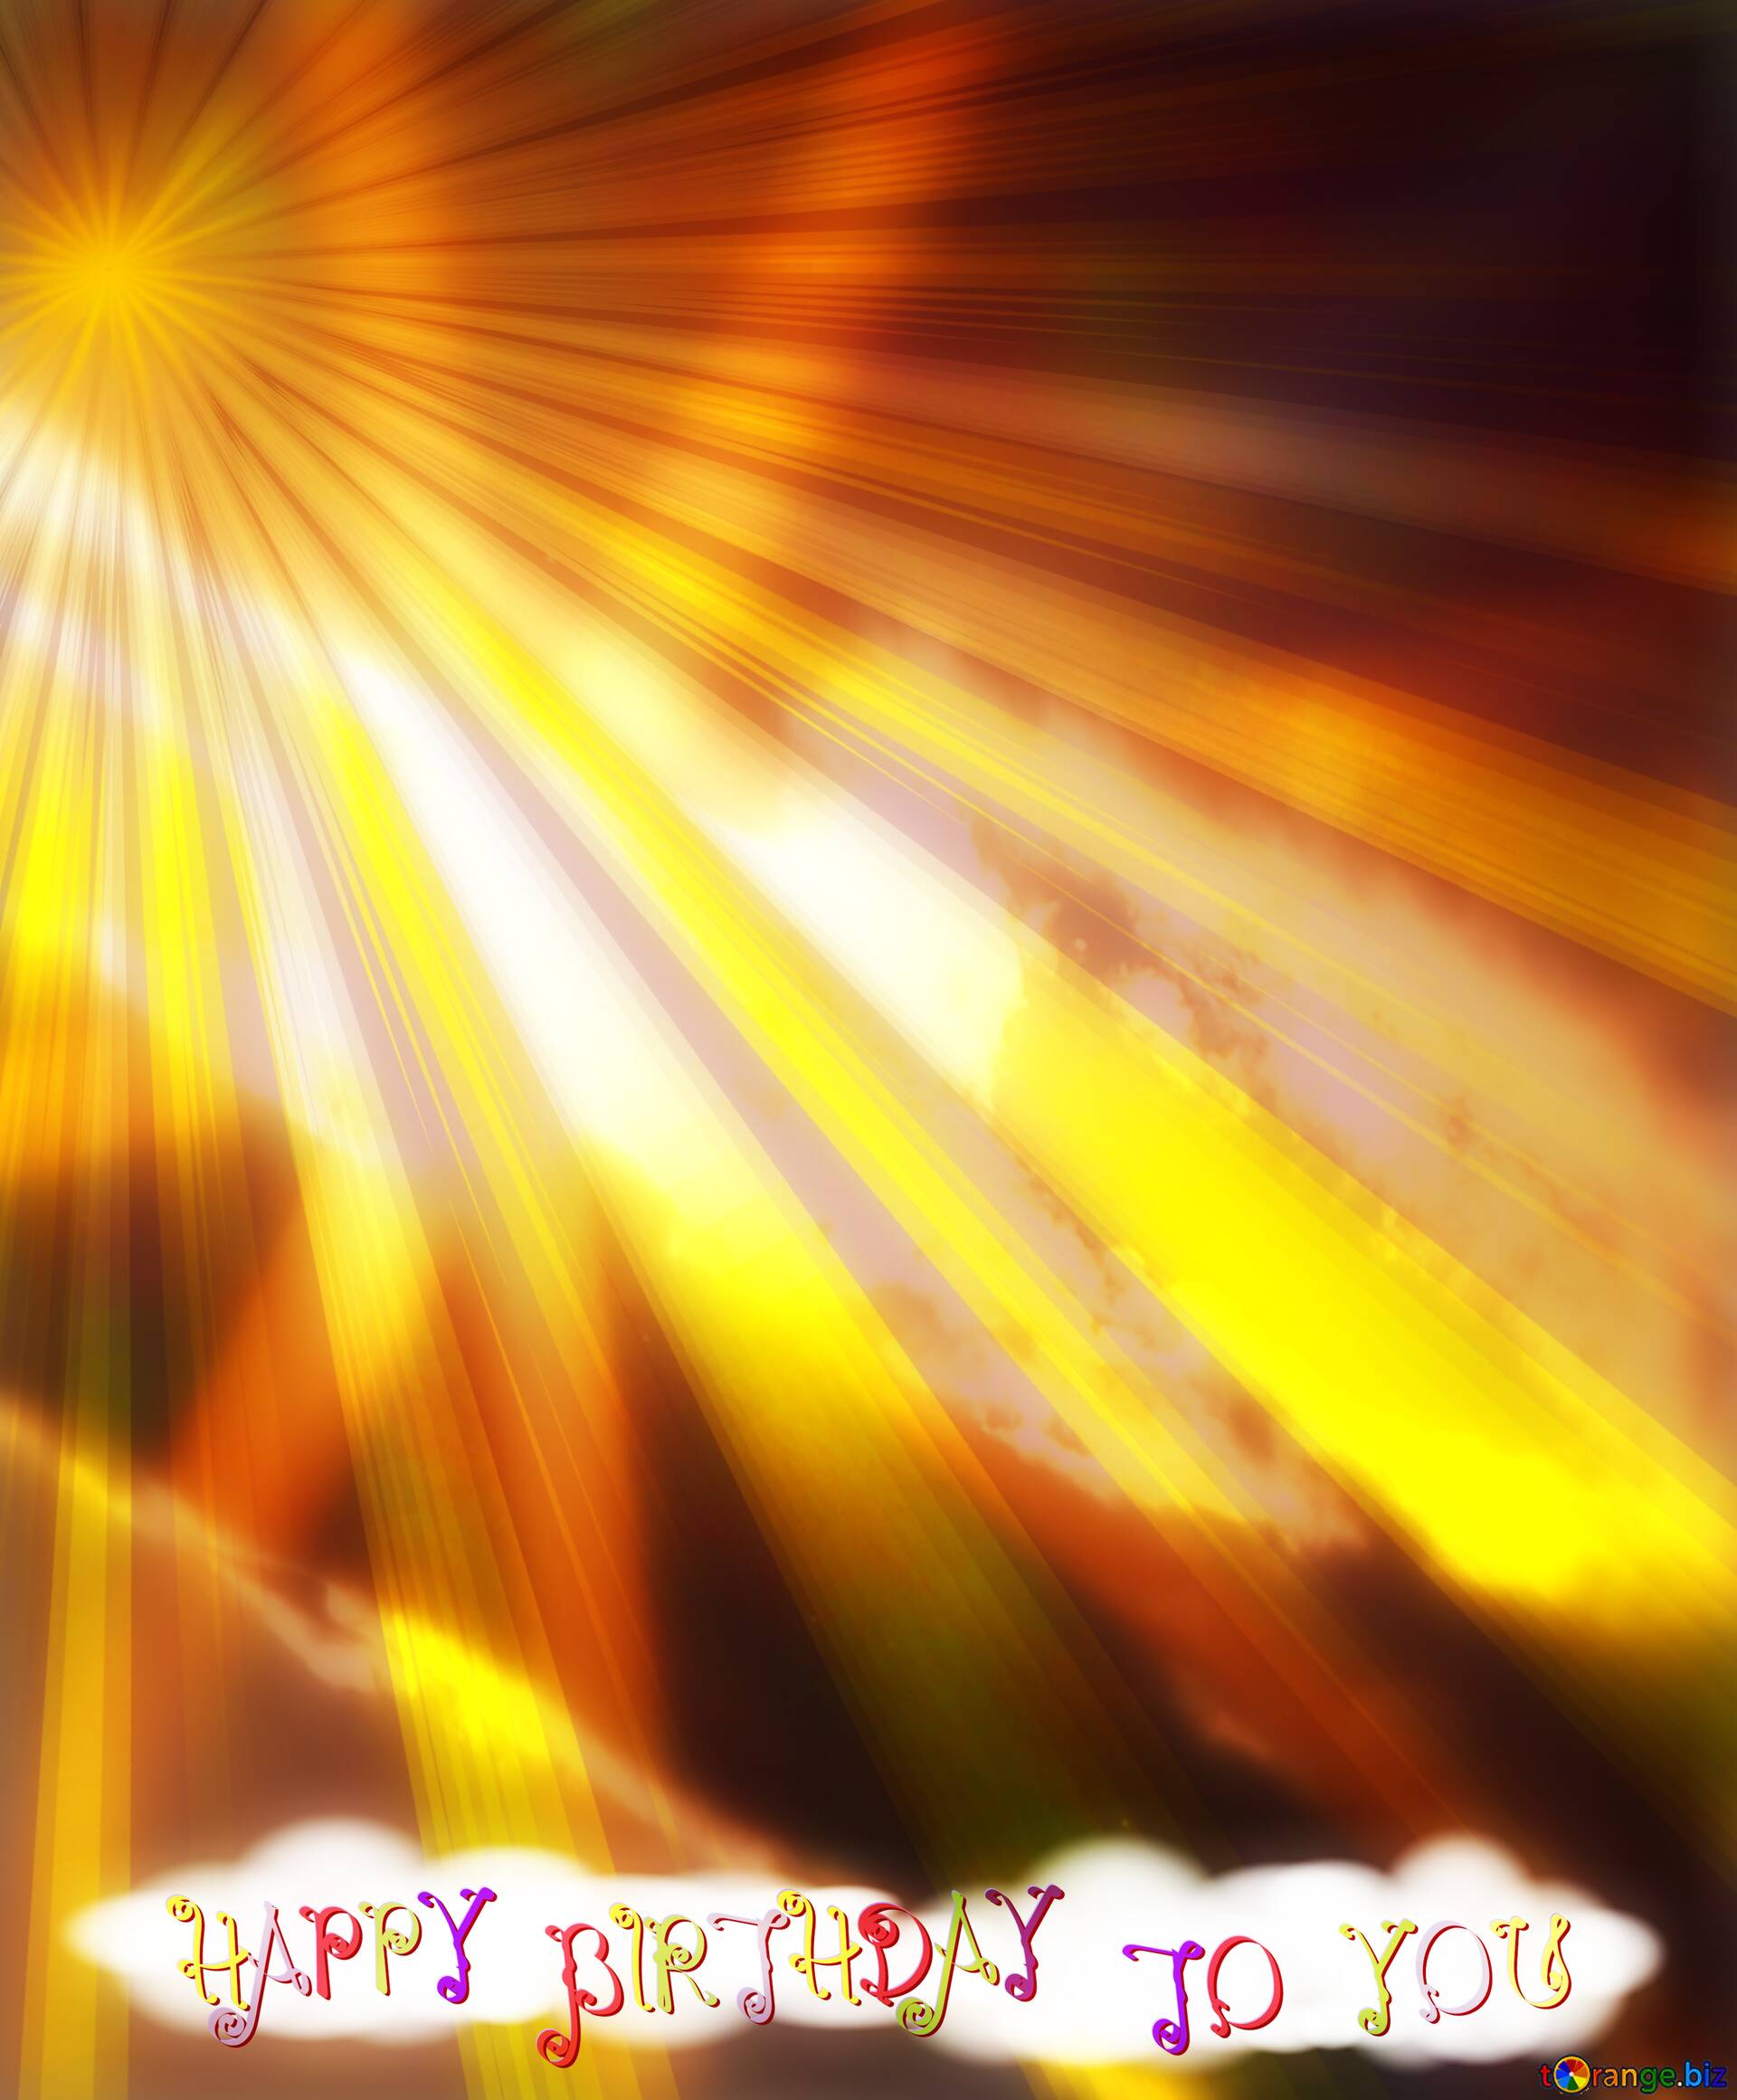 Download free picture happy birthday to you Sunset sunlight shine background  on CC-BY License ~ Free Image Stock  ~ fx №227046